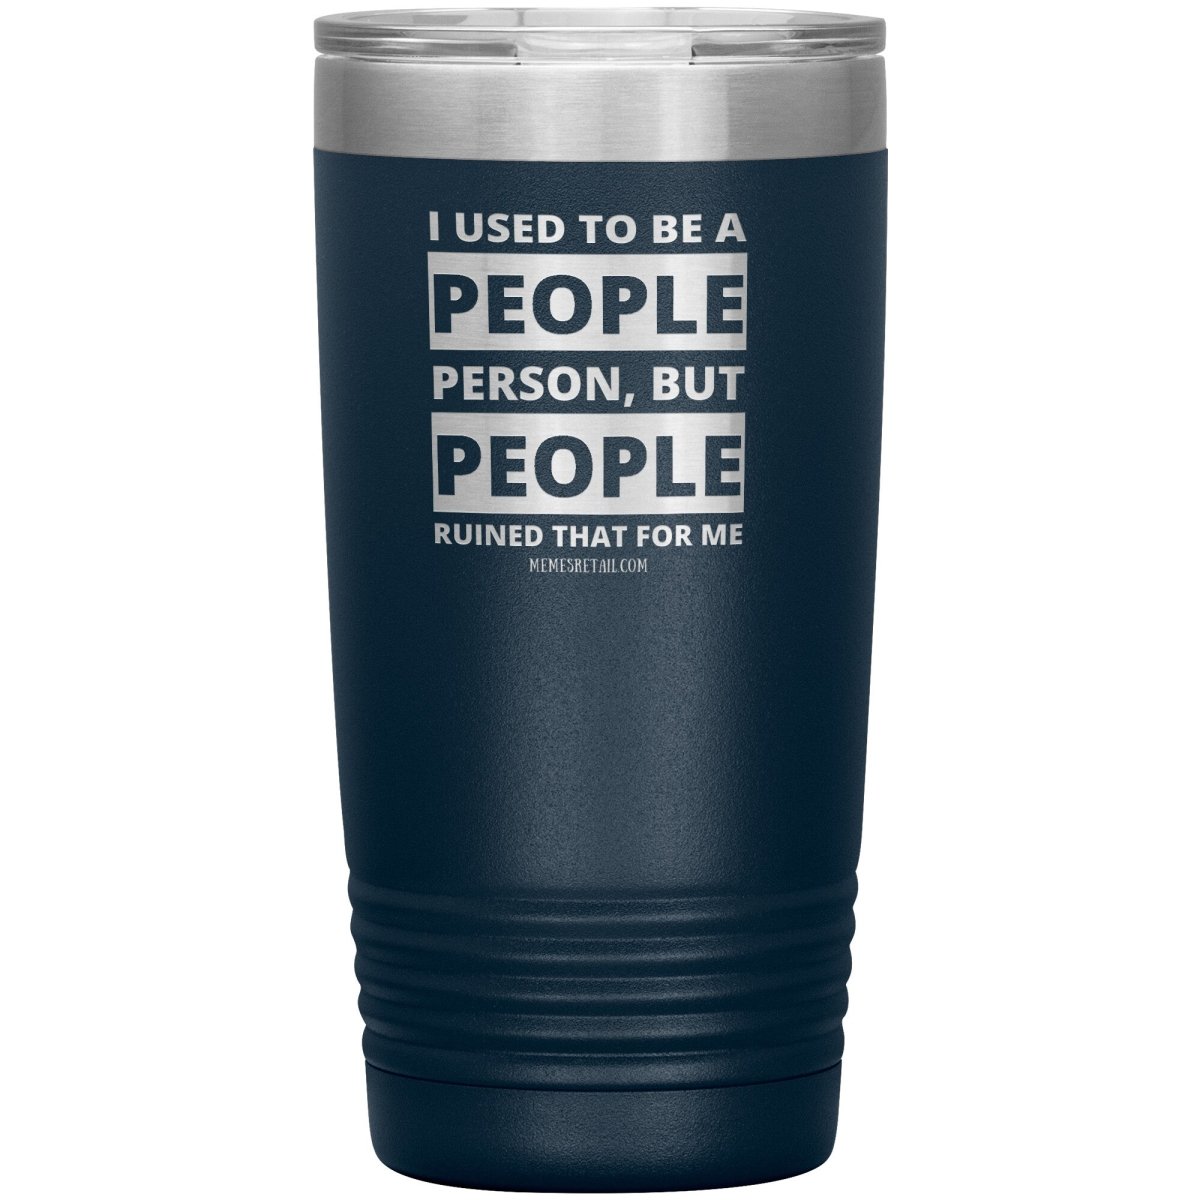 I Used To Be A People Person, But People Ruined That For Me Tumblers, 20oz Insulated Tumbler / Navy - MemesRetail.com